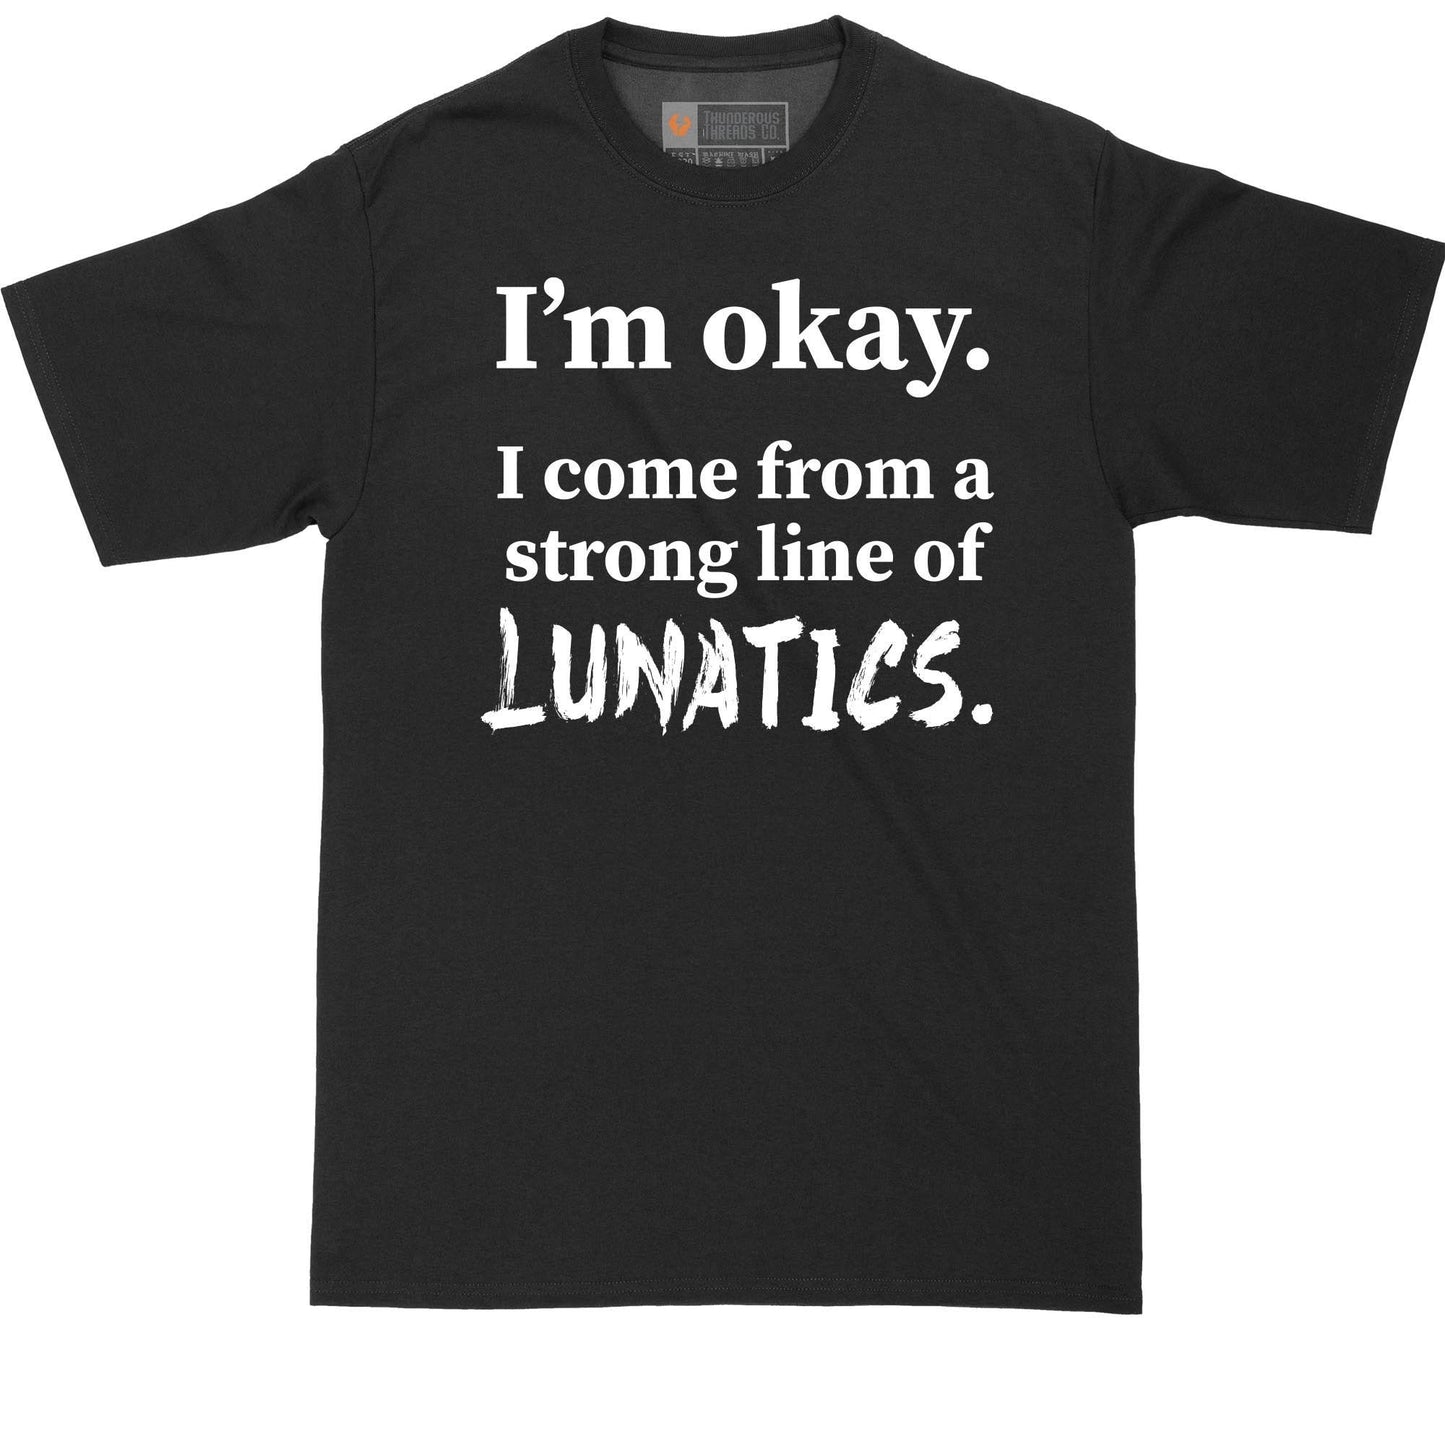 Big and Tall Men | Funny Shirts | I'm Ok - I Come From a Strong Line of Lunatics | Mens Big and Tall Graphic T-Shirt